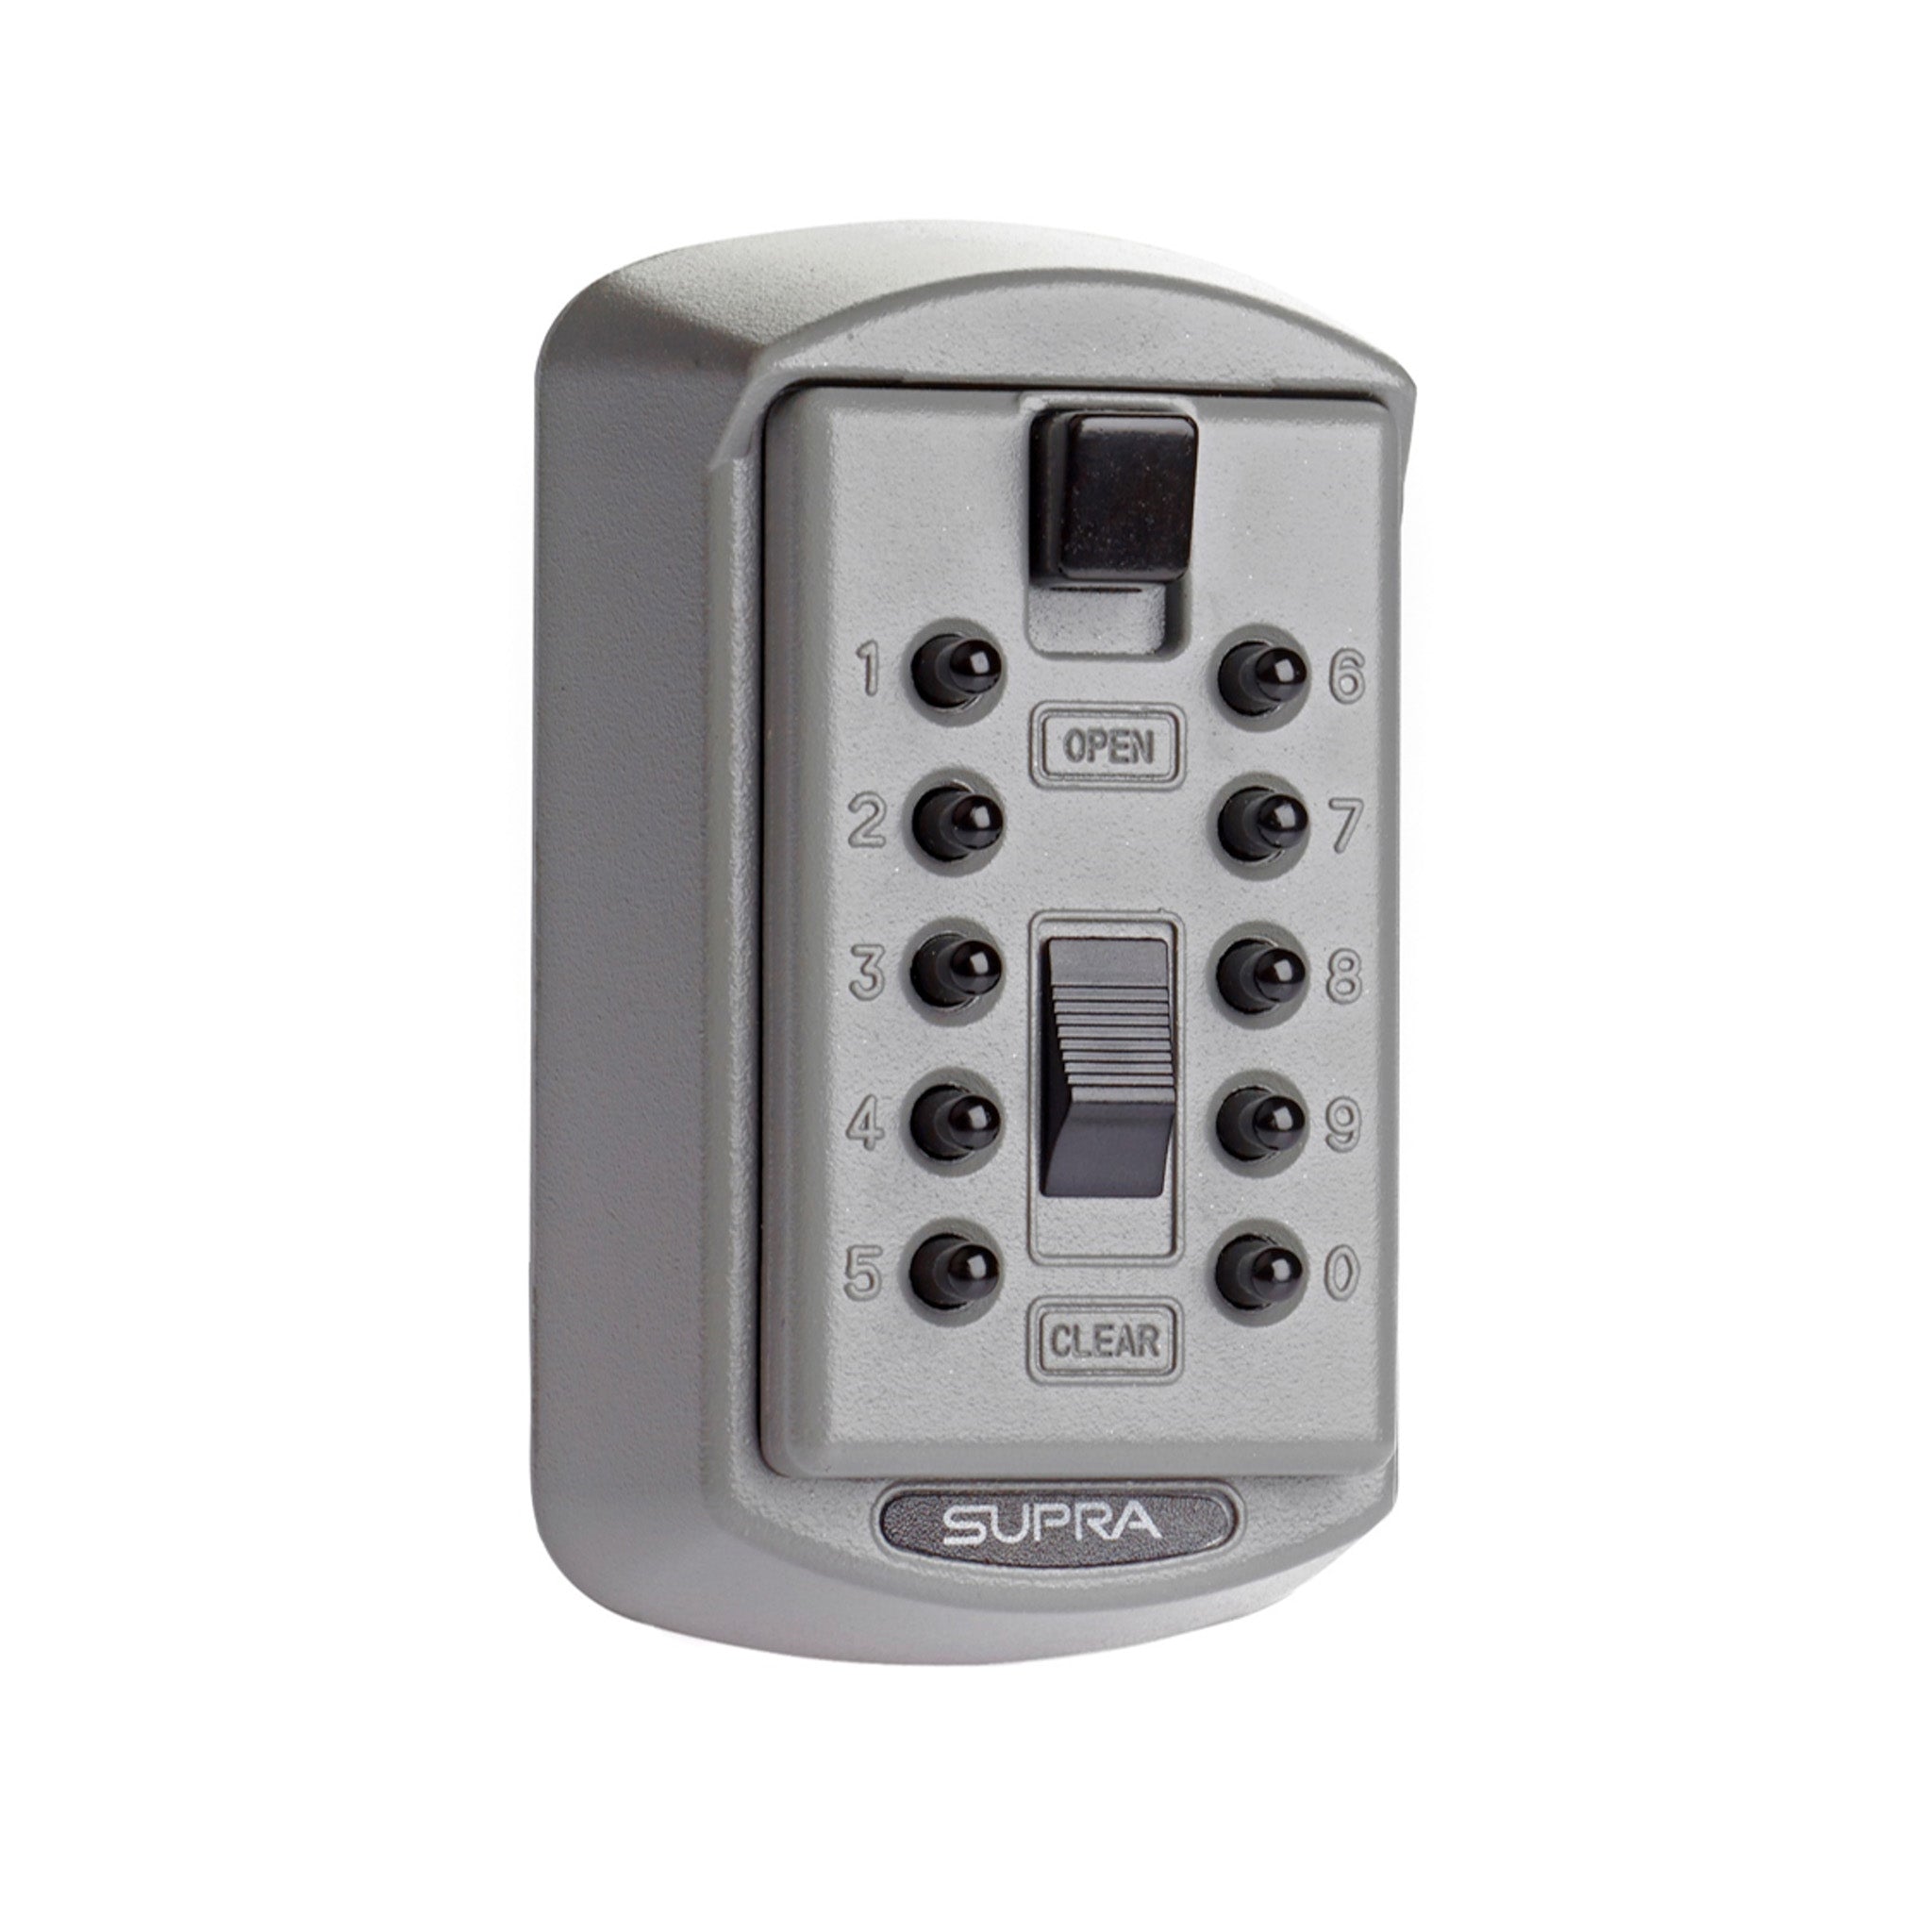 Supra S6 slimline key safe with digits 0-9 and clear button